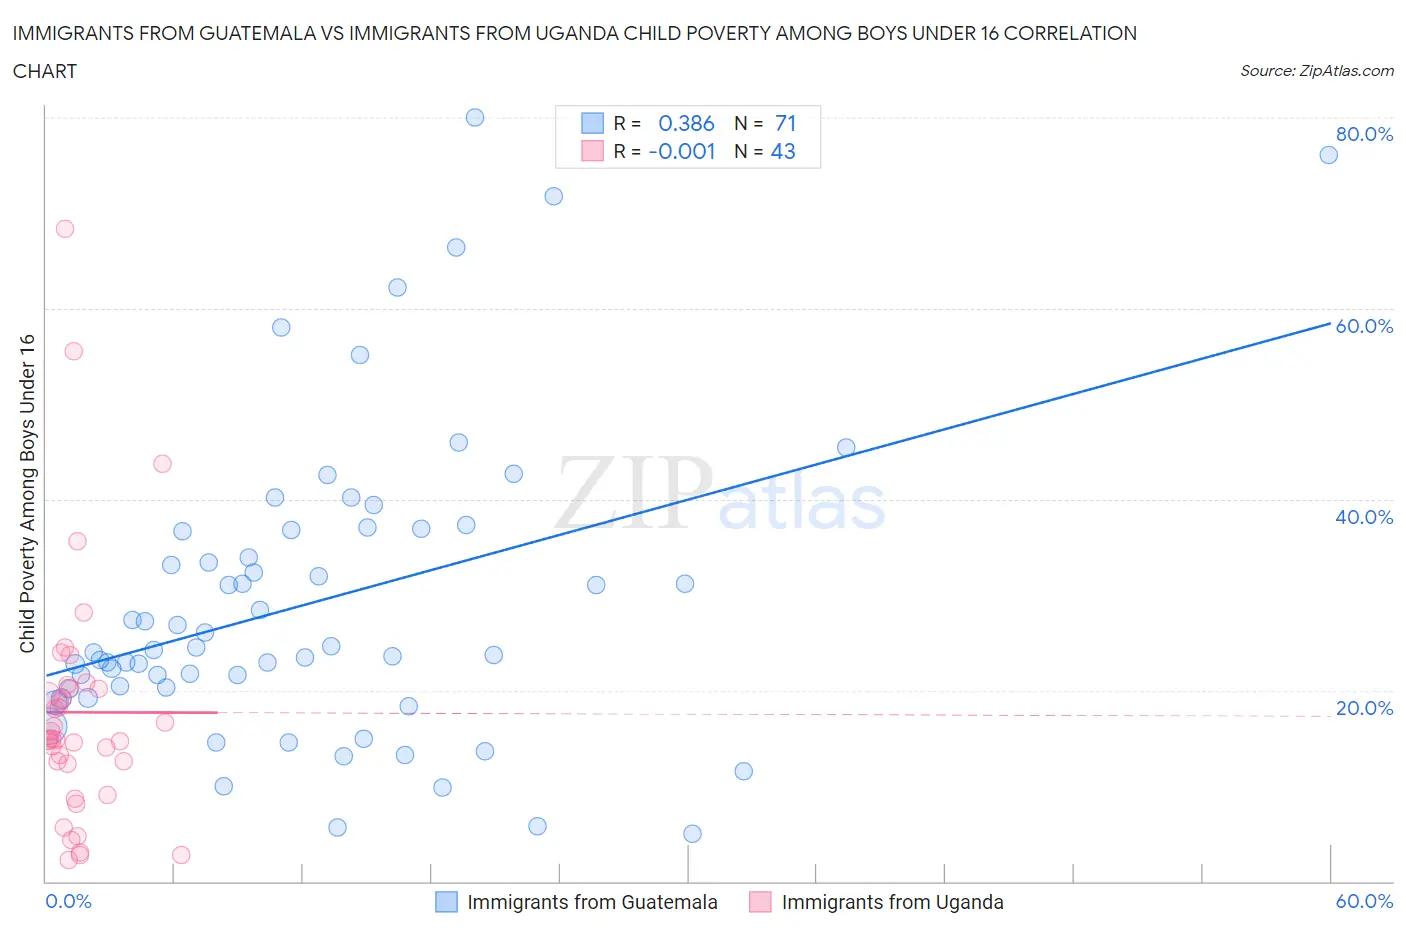 Immigrants from Guatemala vs Immigrants from Uganda Child Poverty Among Boys Under 16